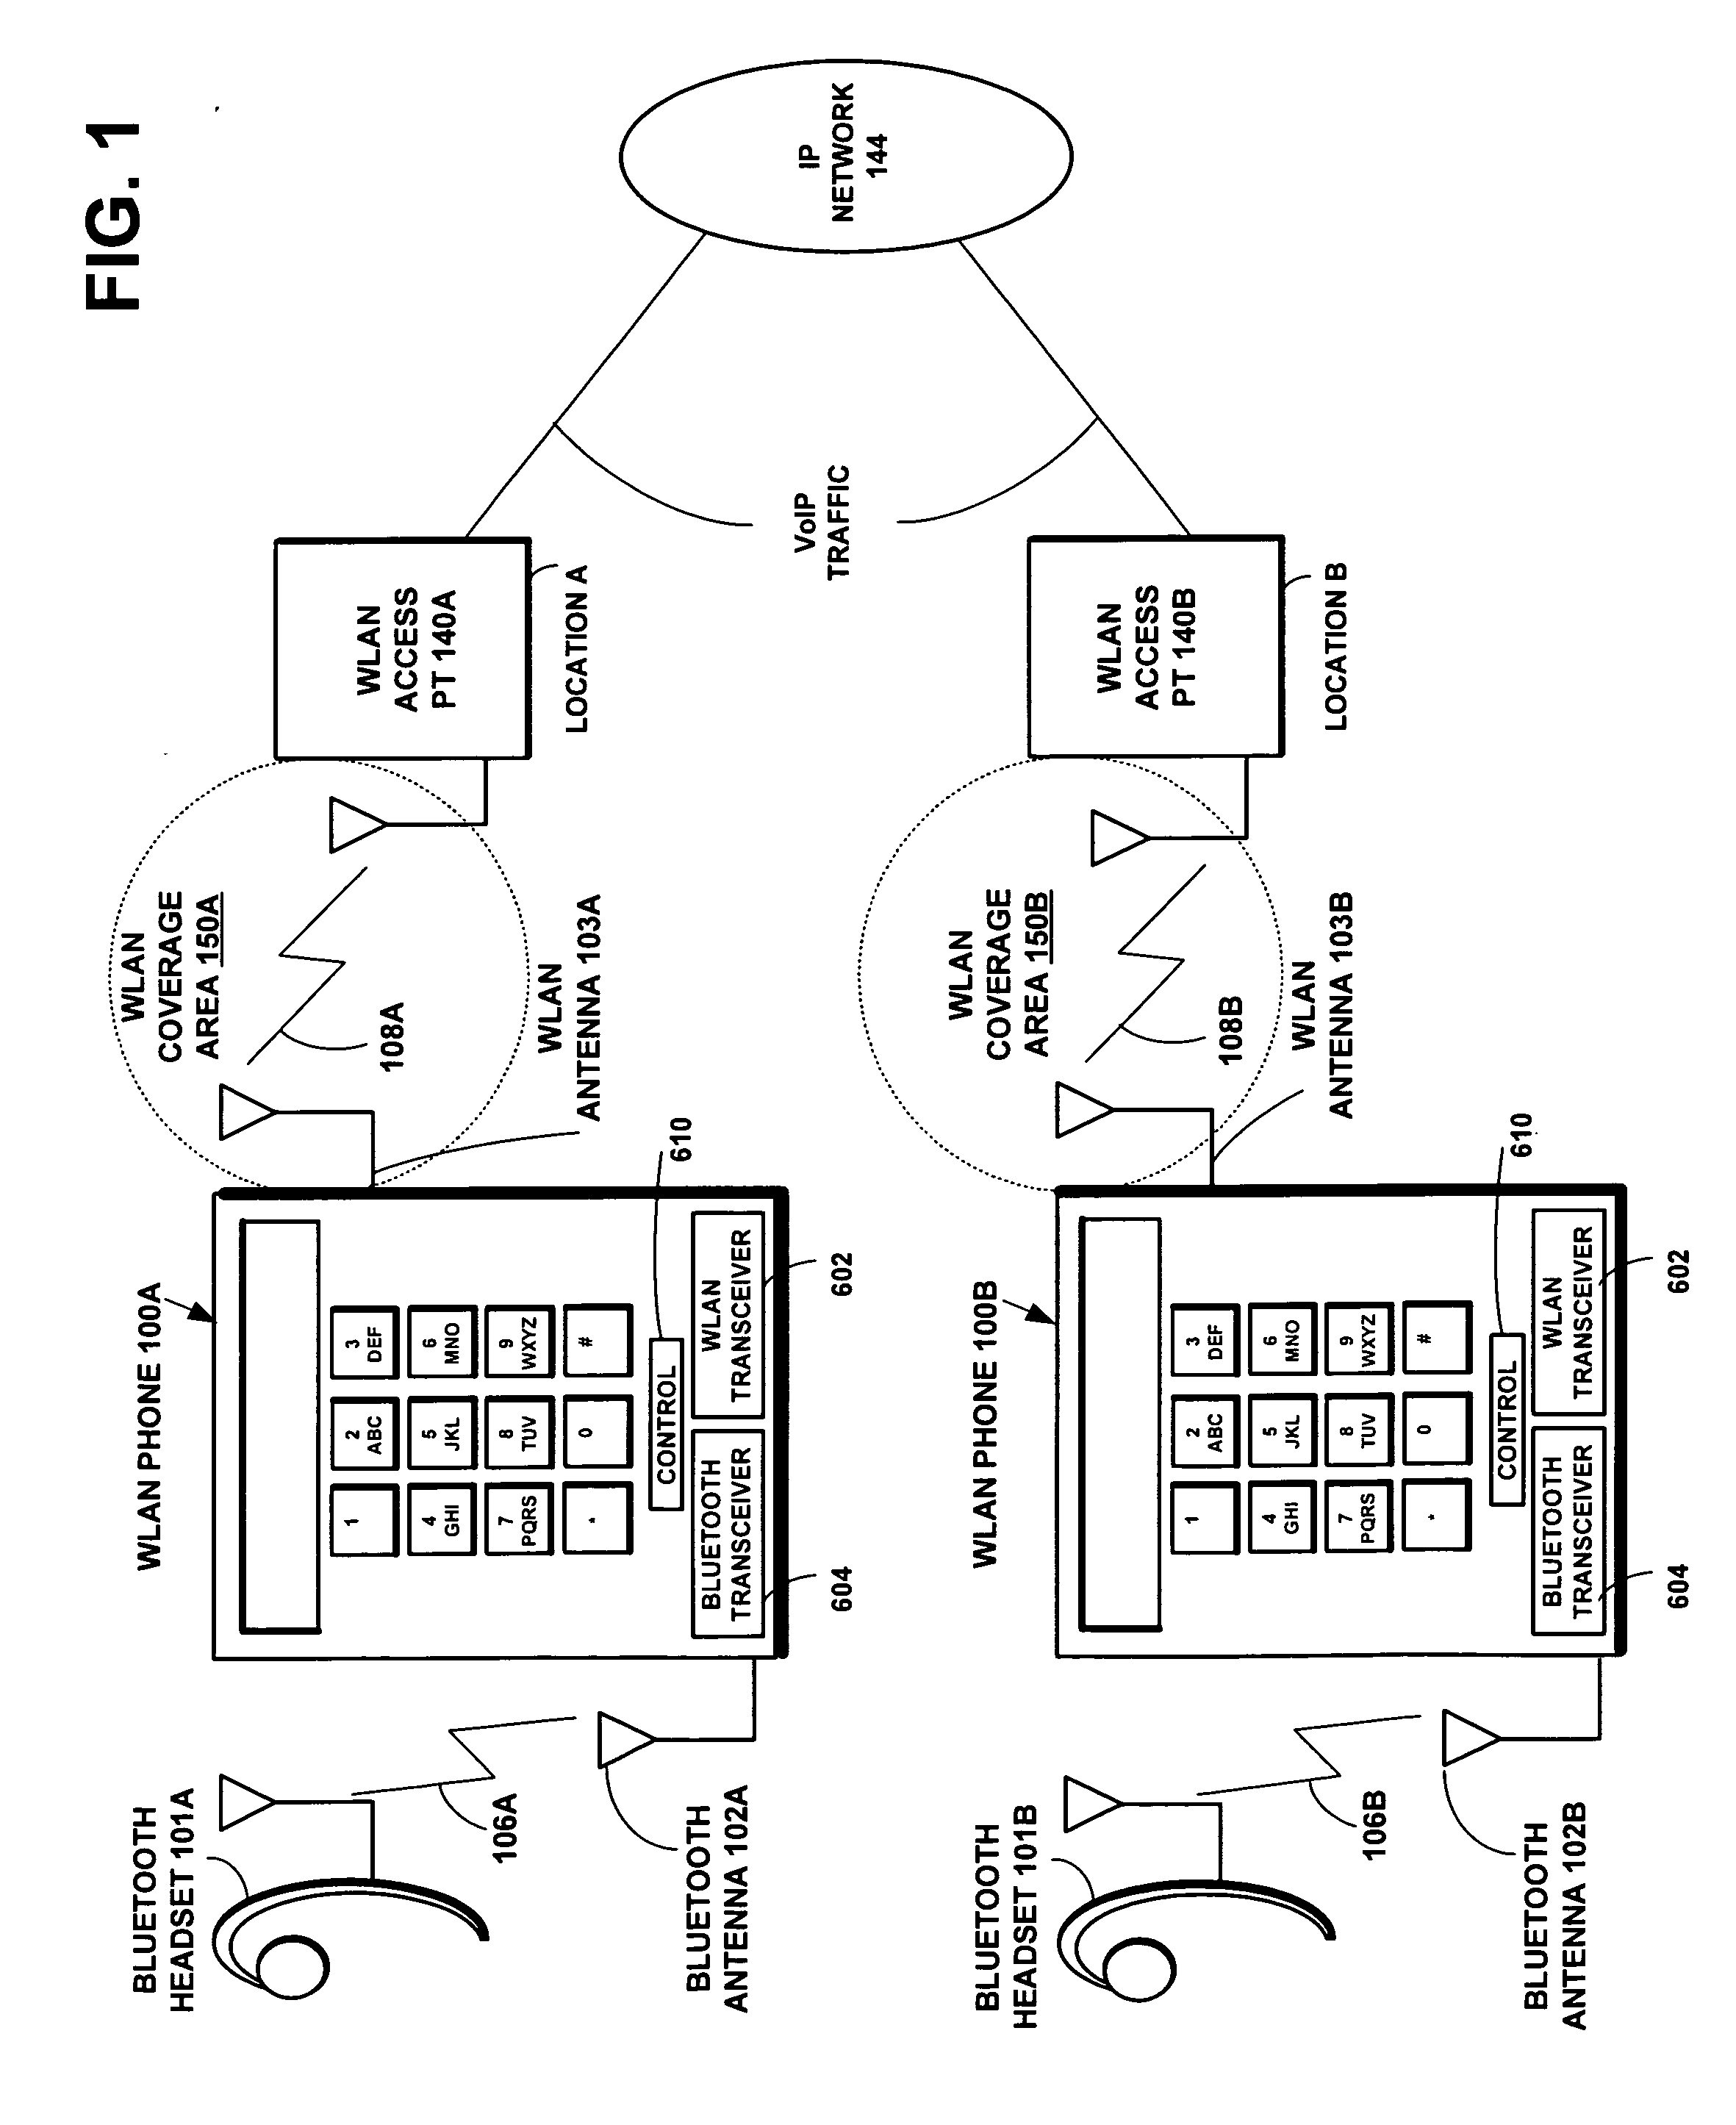 Method and system for VoIP over WLAN to bluetooth headset using ACL link and sniff for aligned eSCO transmission